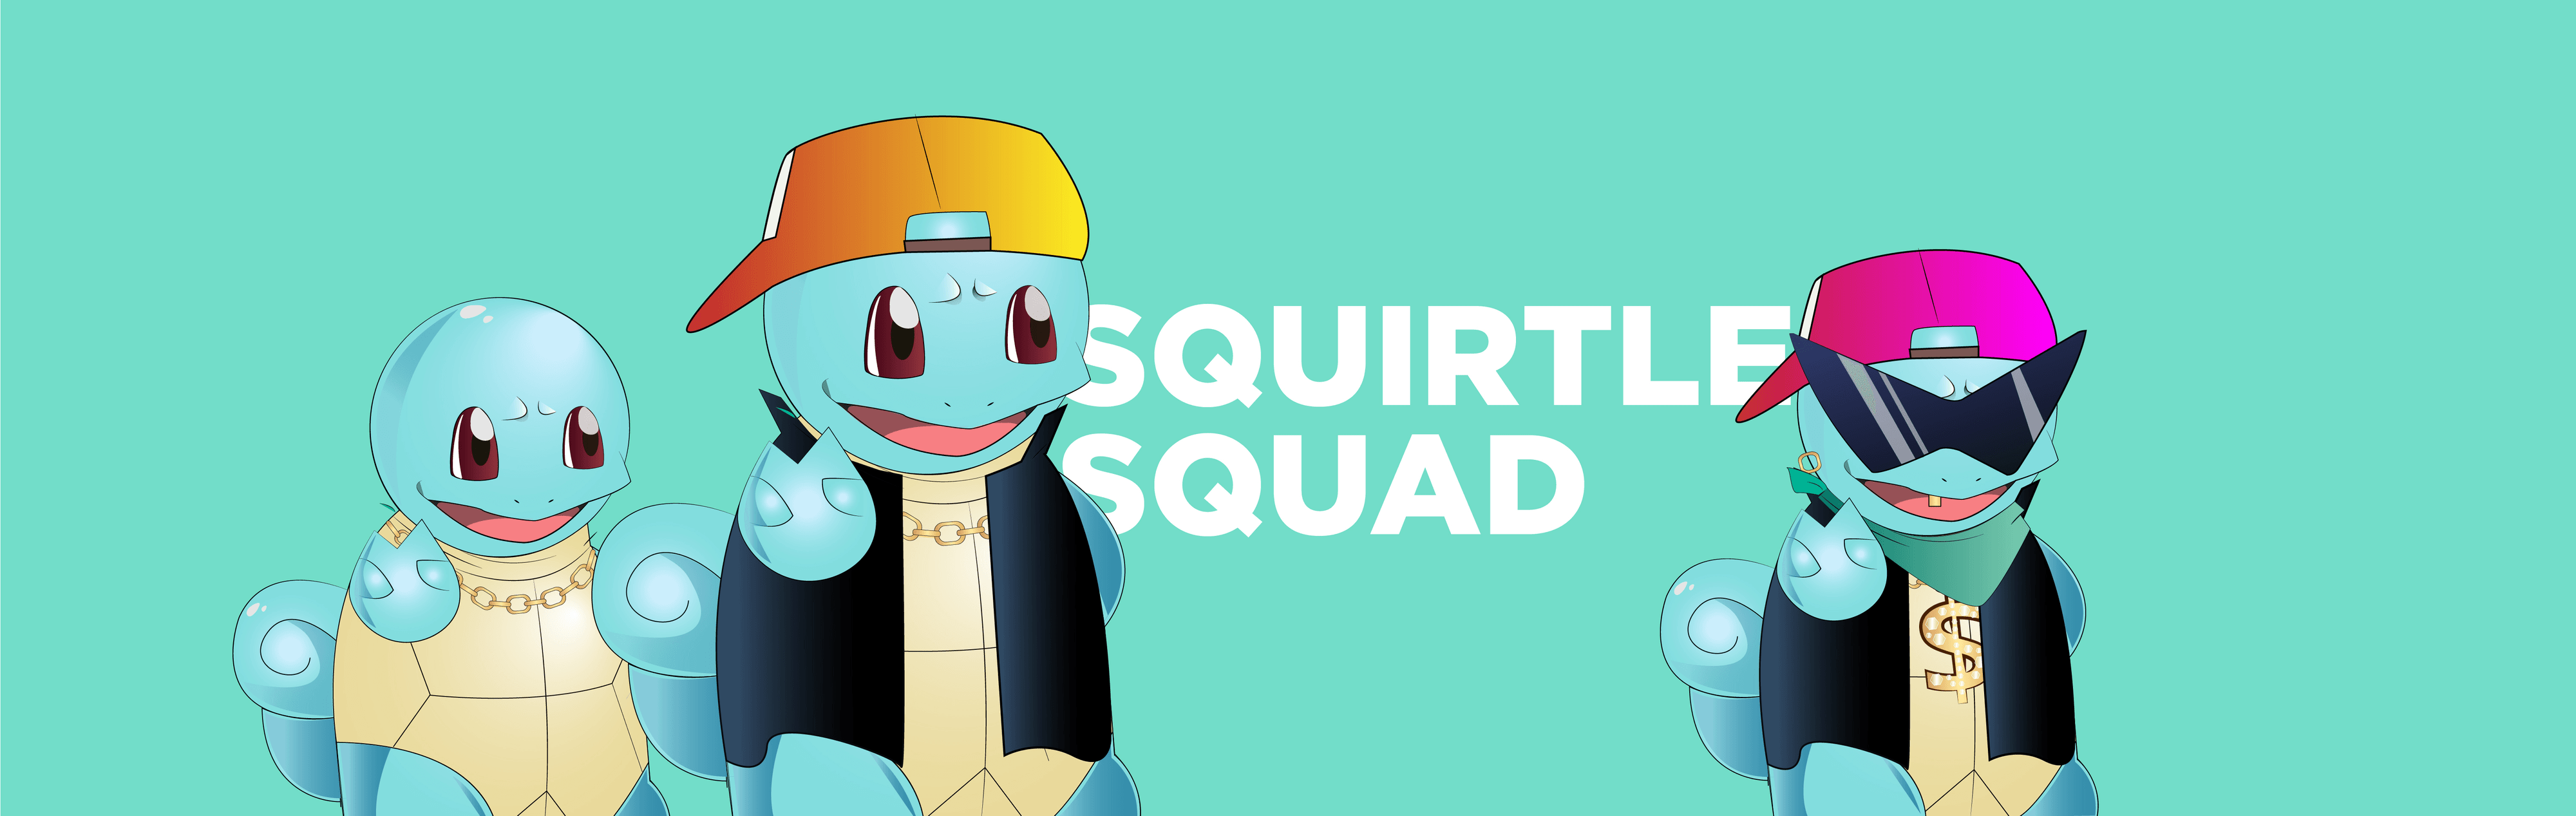 Squirtle_SQUAD_nft banner